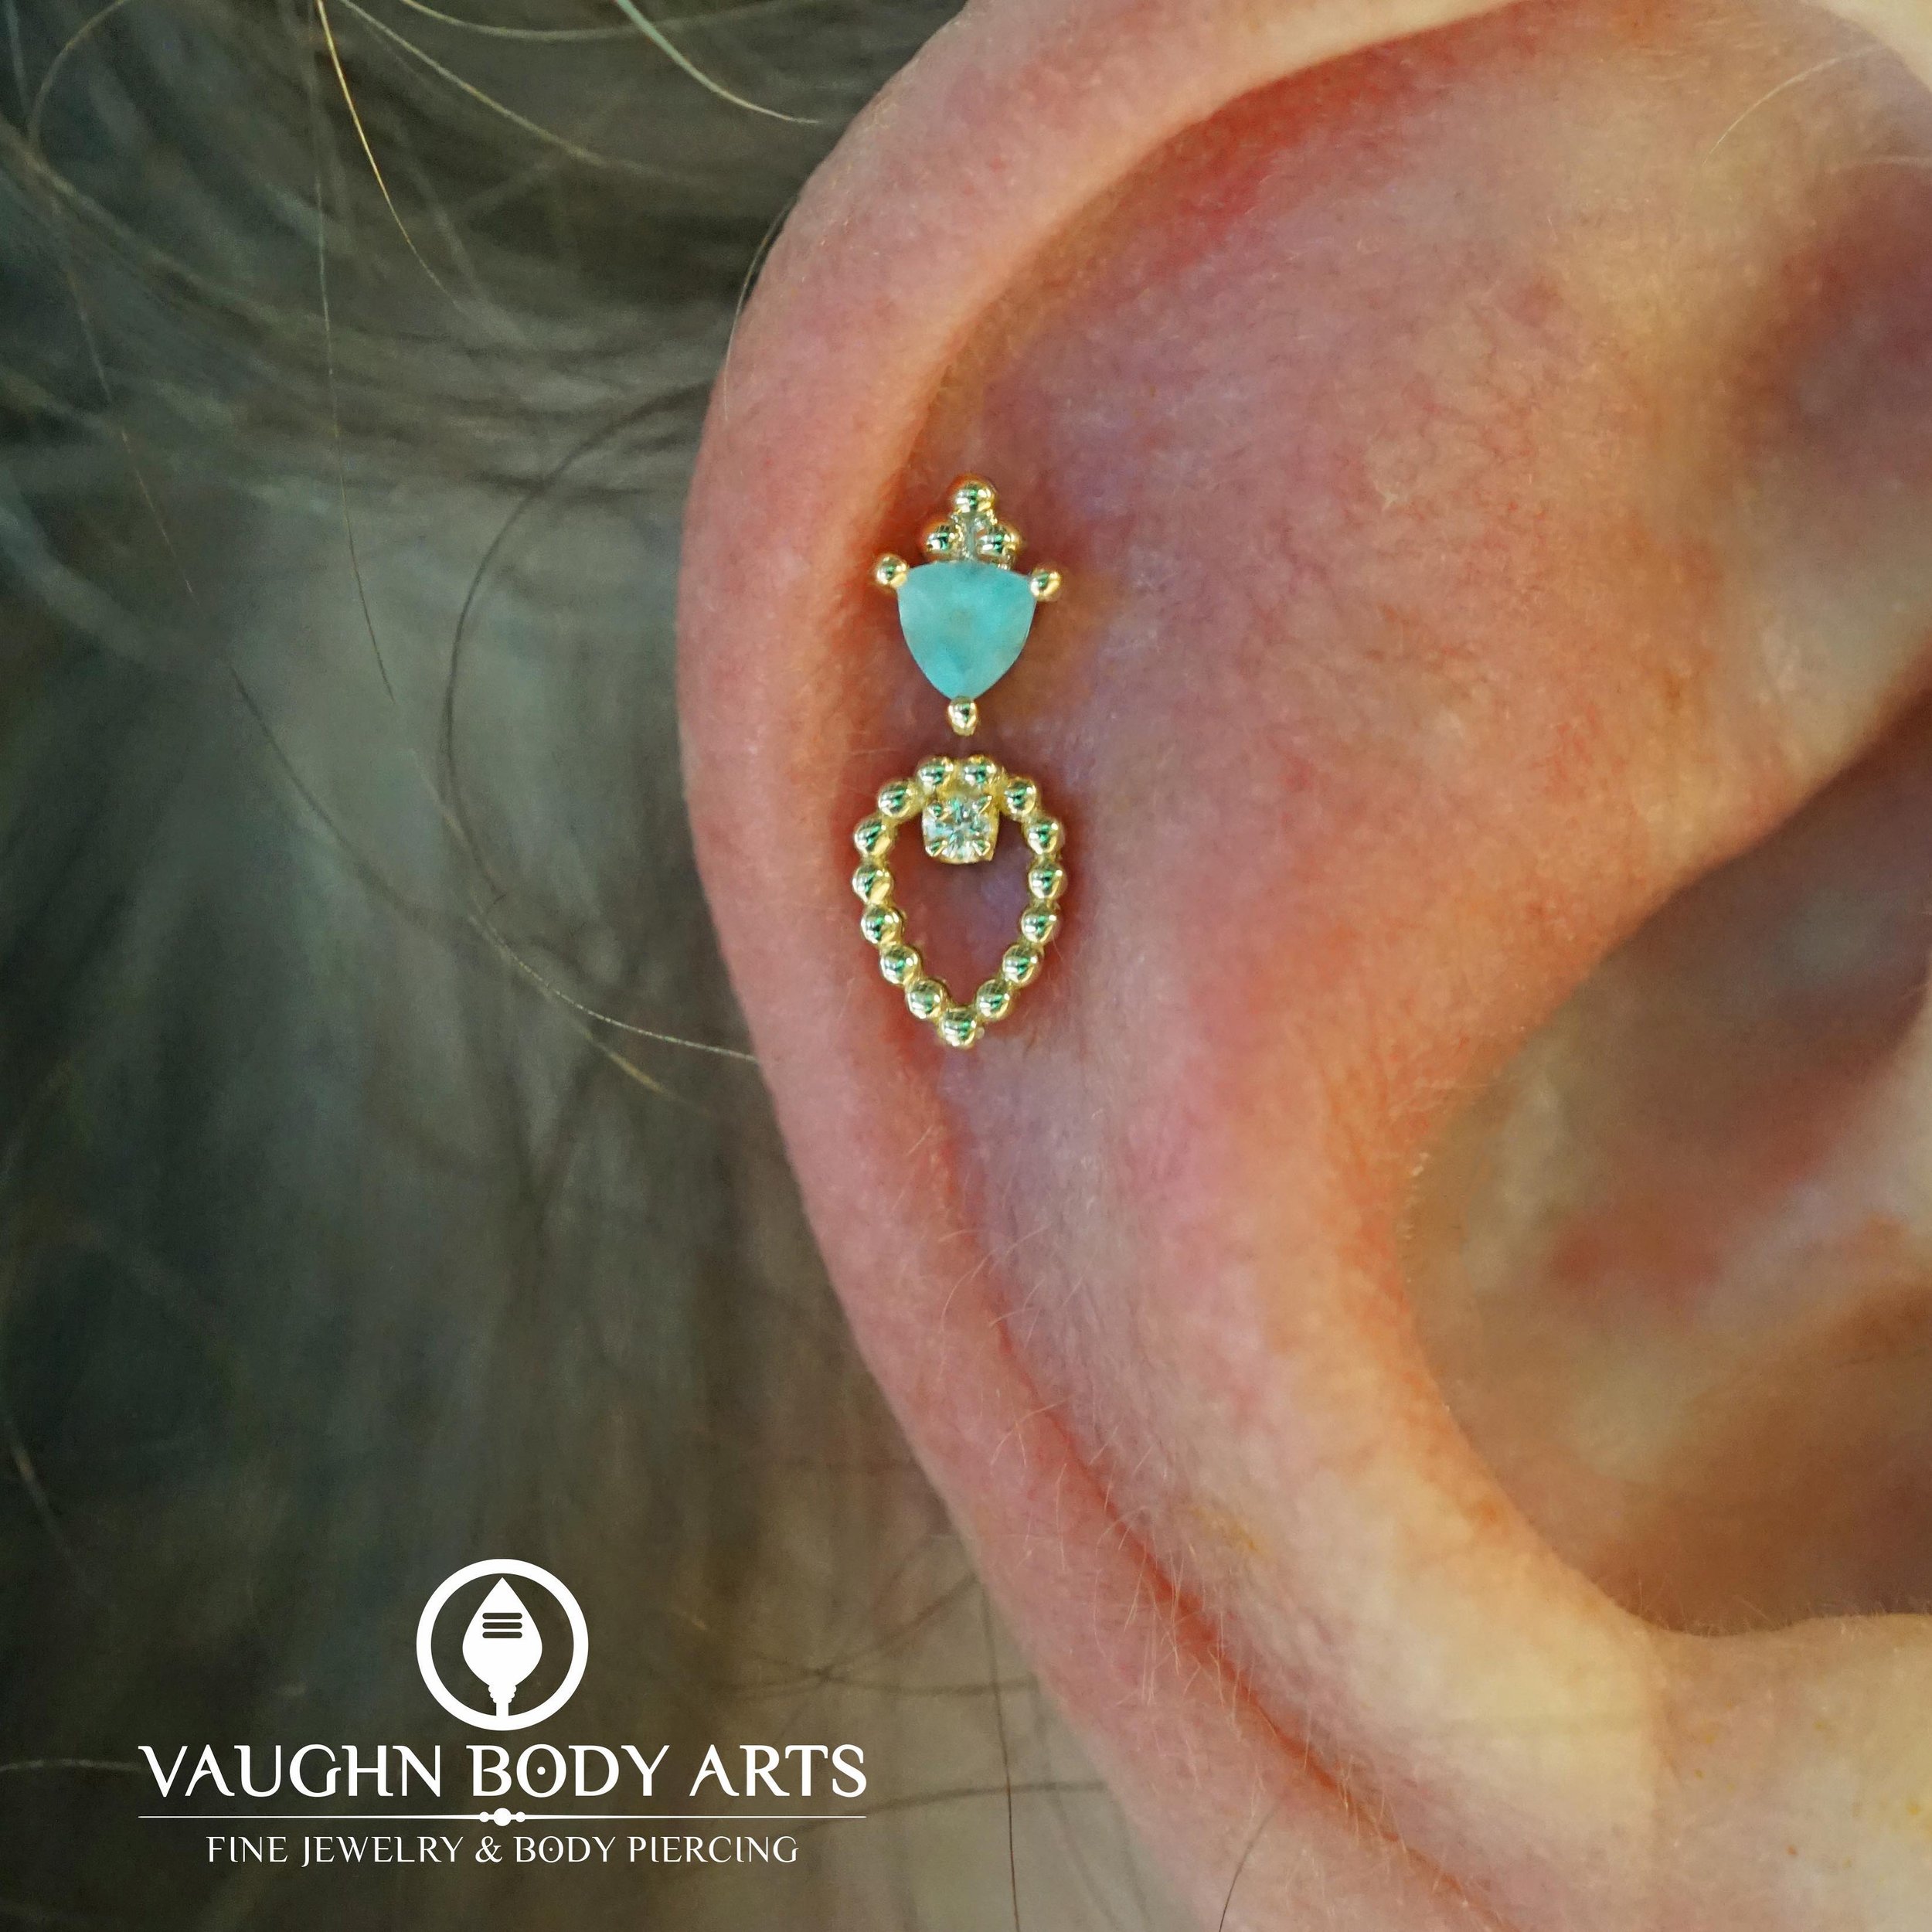 Here&rsquo;s a super cute double helix we got to do for Ivy earlier this week. 

Ivy was very open for suggestions and wanted guidance with picking out two pieces that would flow really well together. We decided on this combination of a yellow gold &